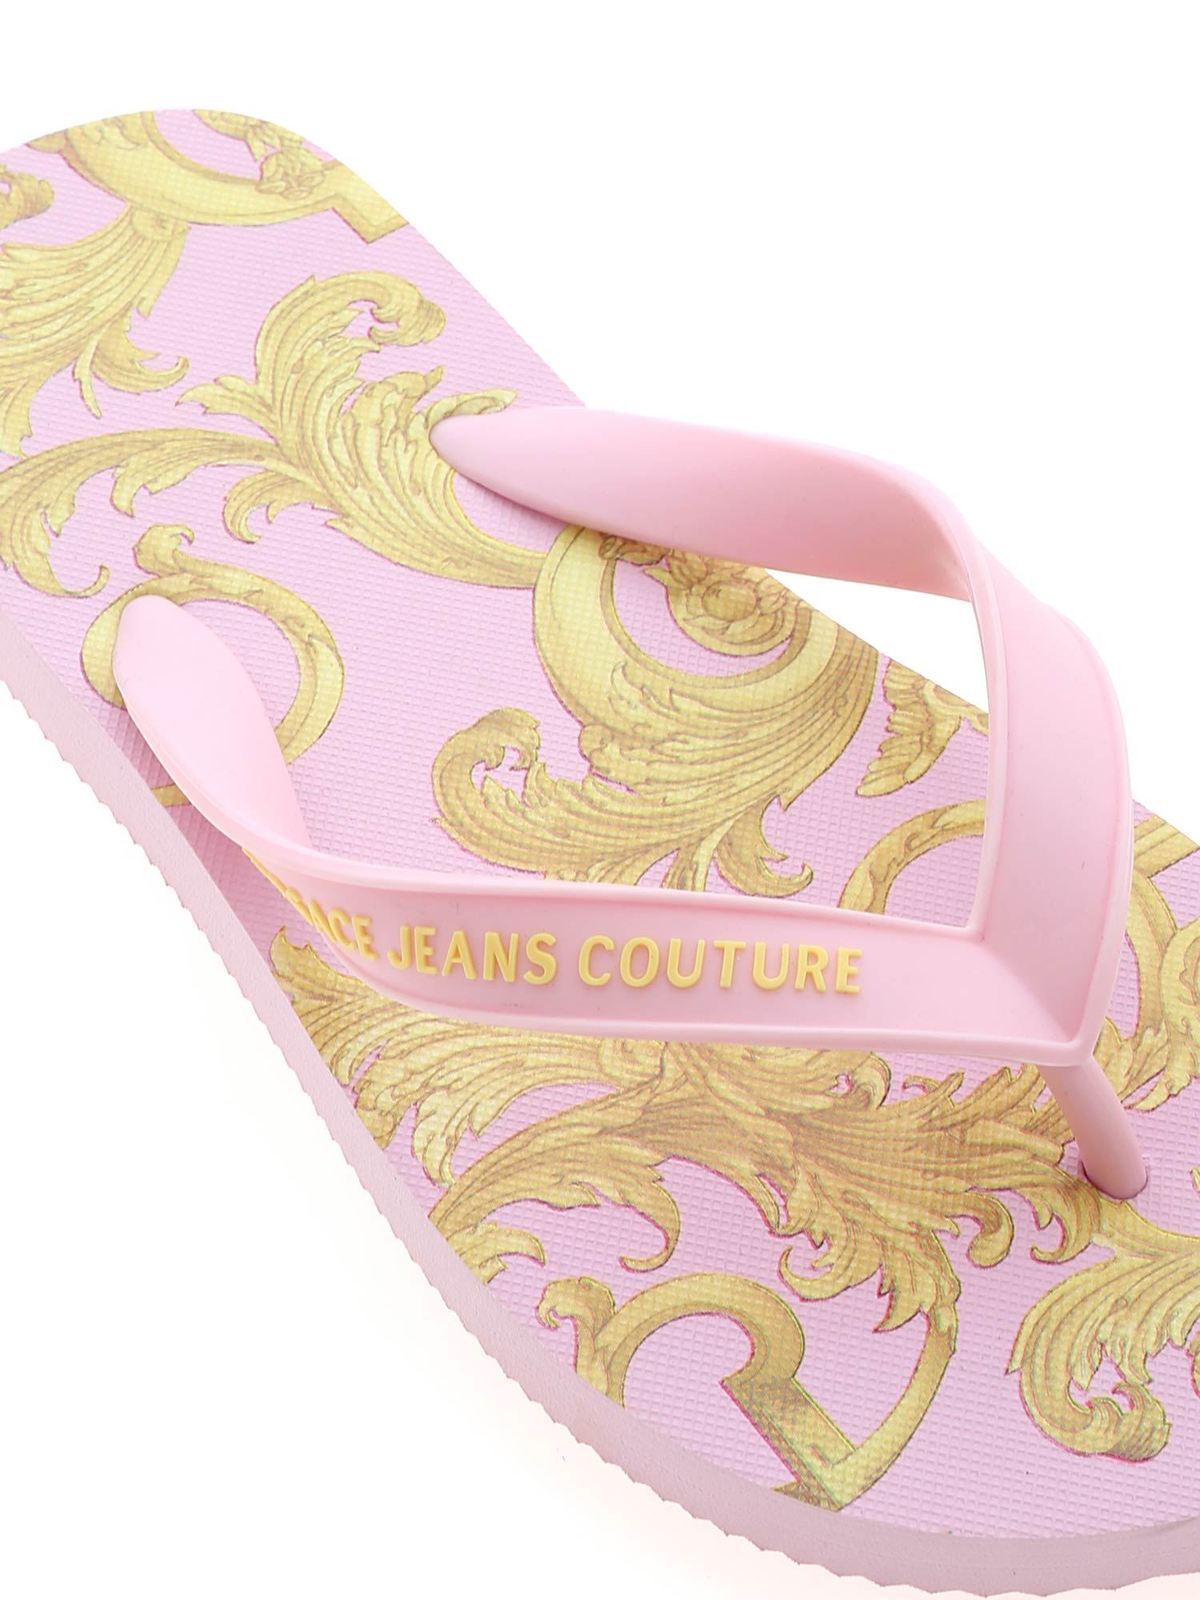 versace pink slippers